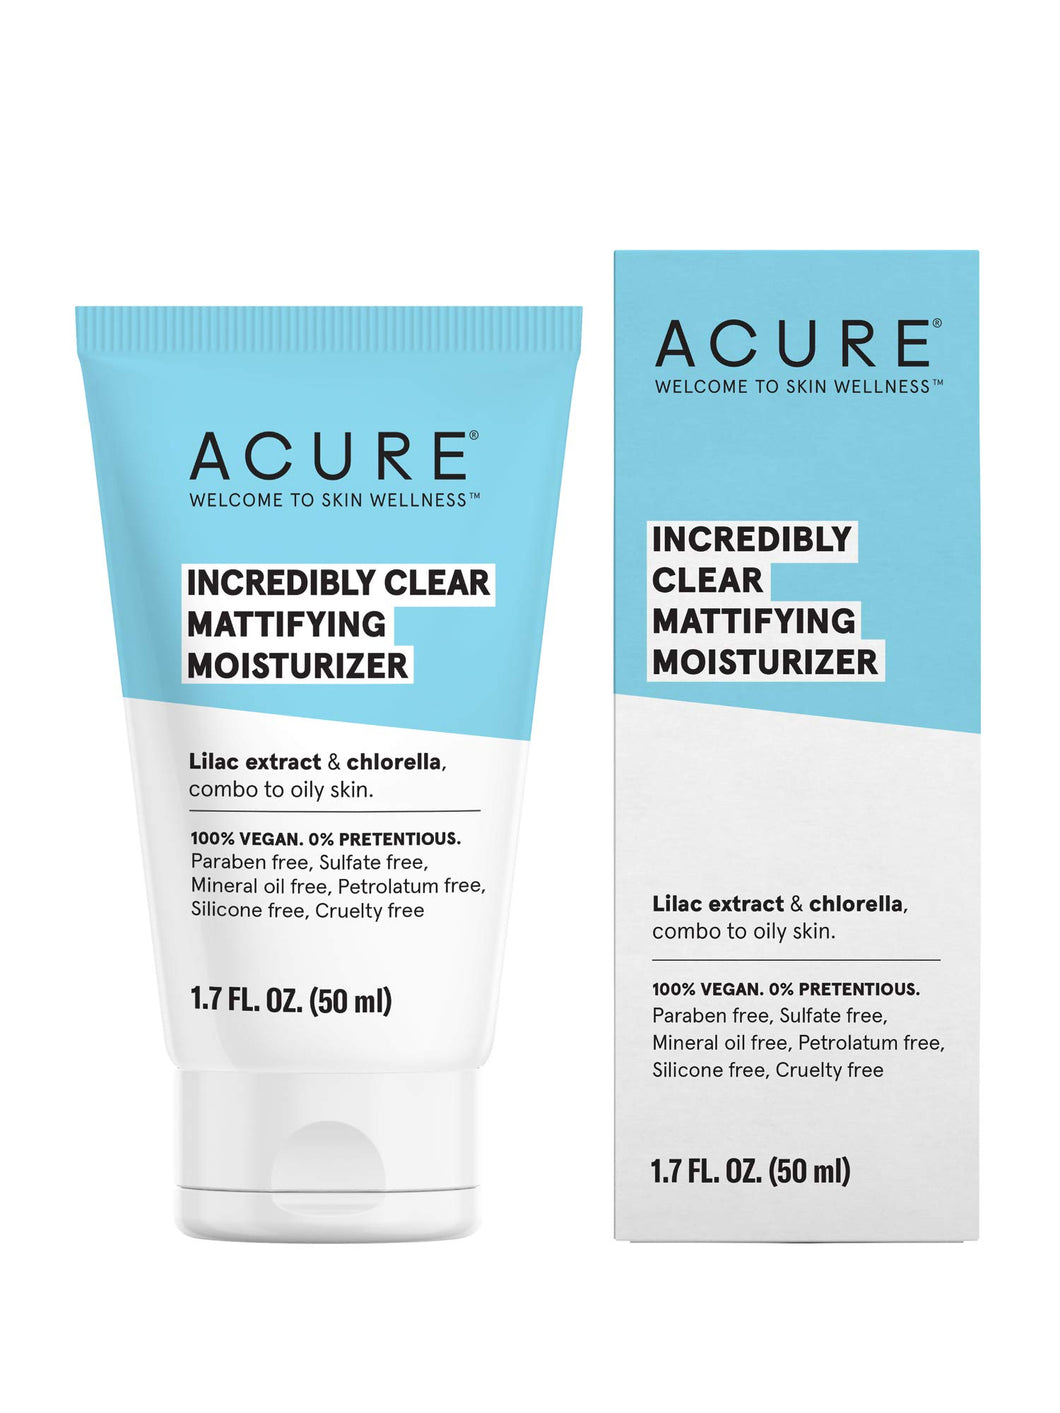 Acure Incredibly Clear Mattifying Face Moisturizer - Matte Finish Moisturizing Oil-Free Facial Cream Enriched with Lilac Extract & Chlorella -Achieve Skin Clarity, Smooth Texture & Pore Toning, 1.7 oz